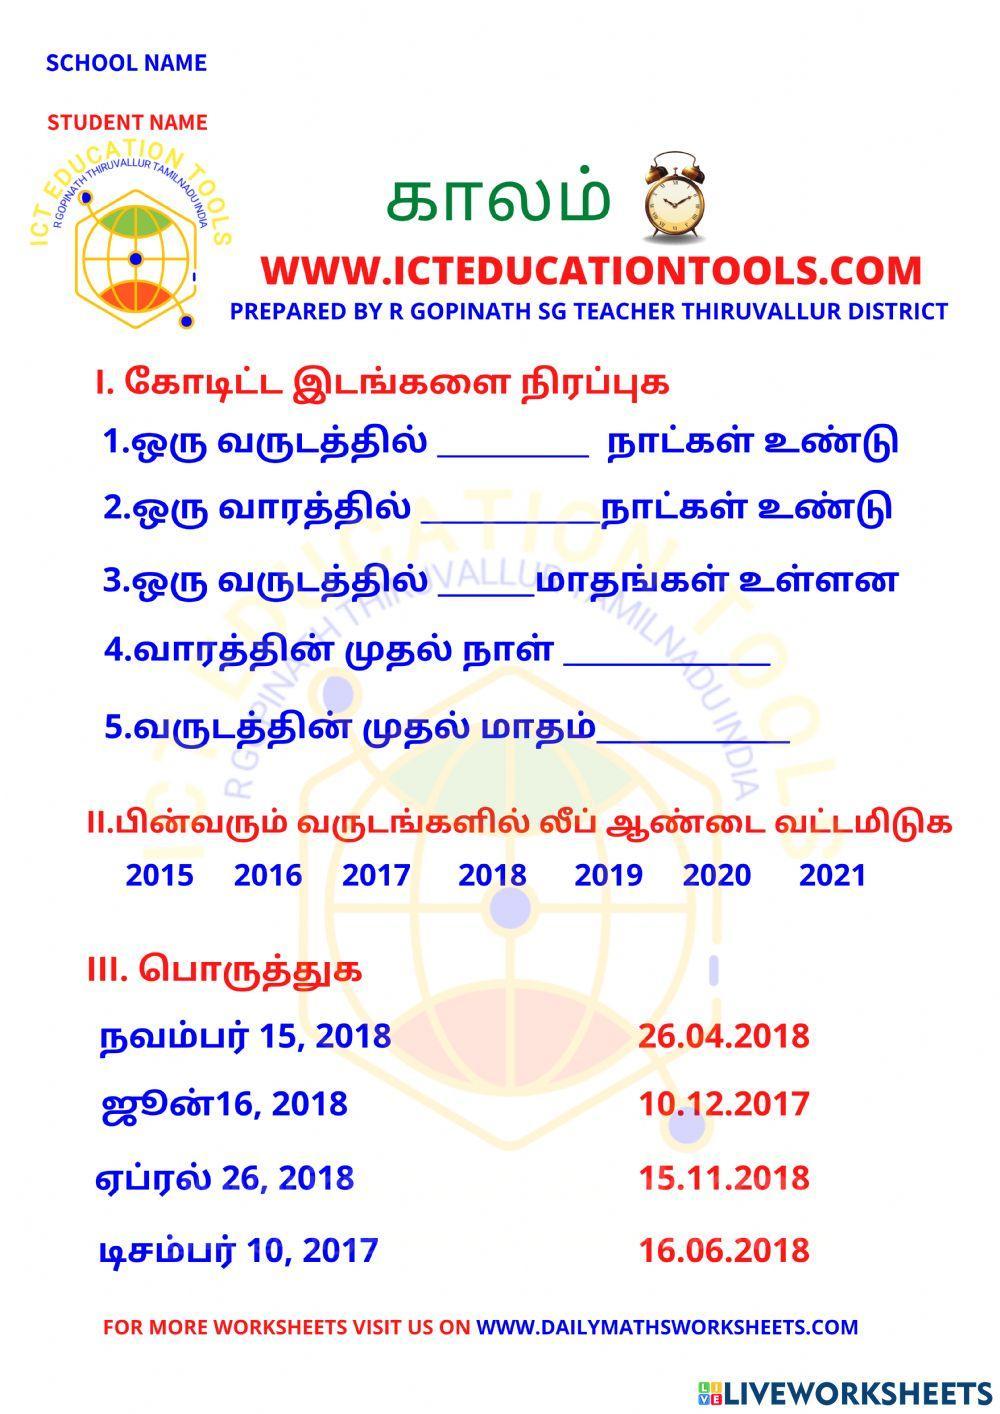 Class 3 time TAMIL VERSION